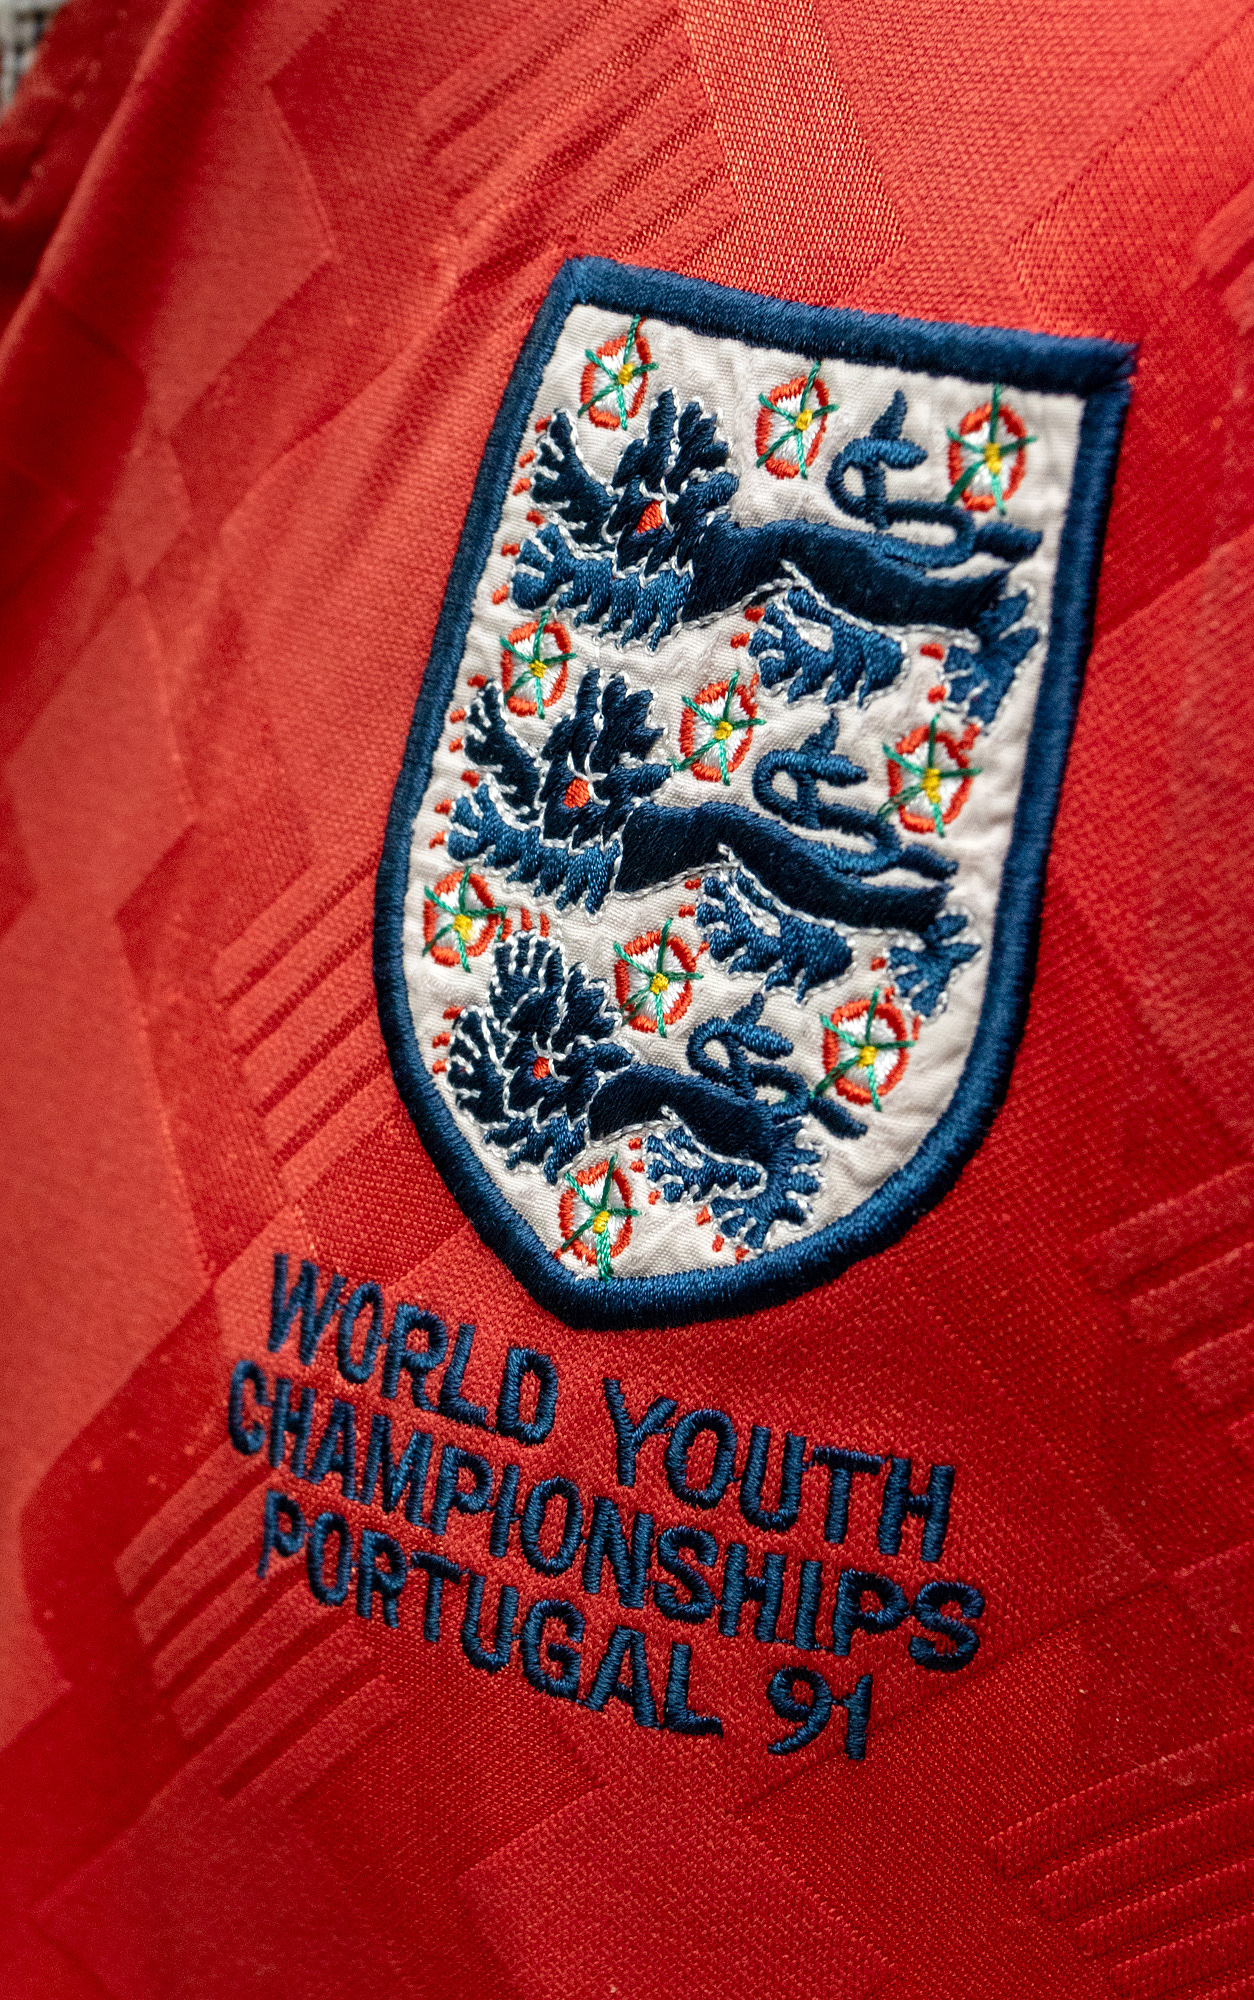 England: An England, World Youth Championships Portugal 1991, possibly match-issued shirt, no number - Image 3 of 4